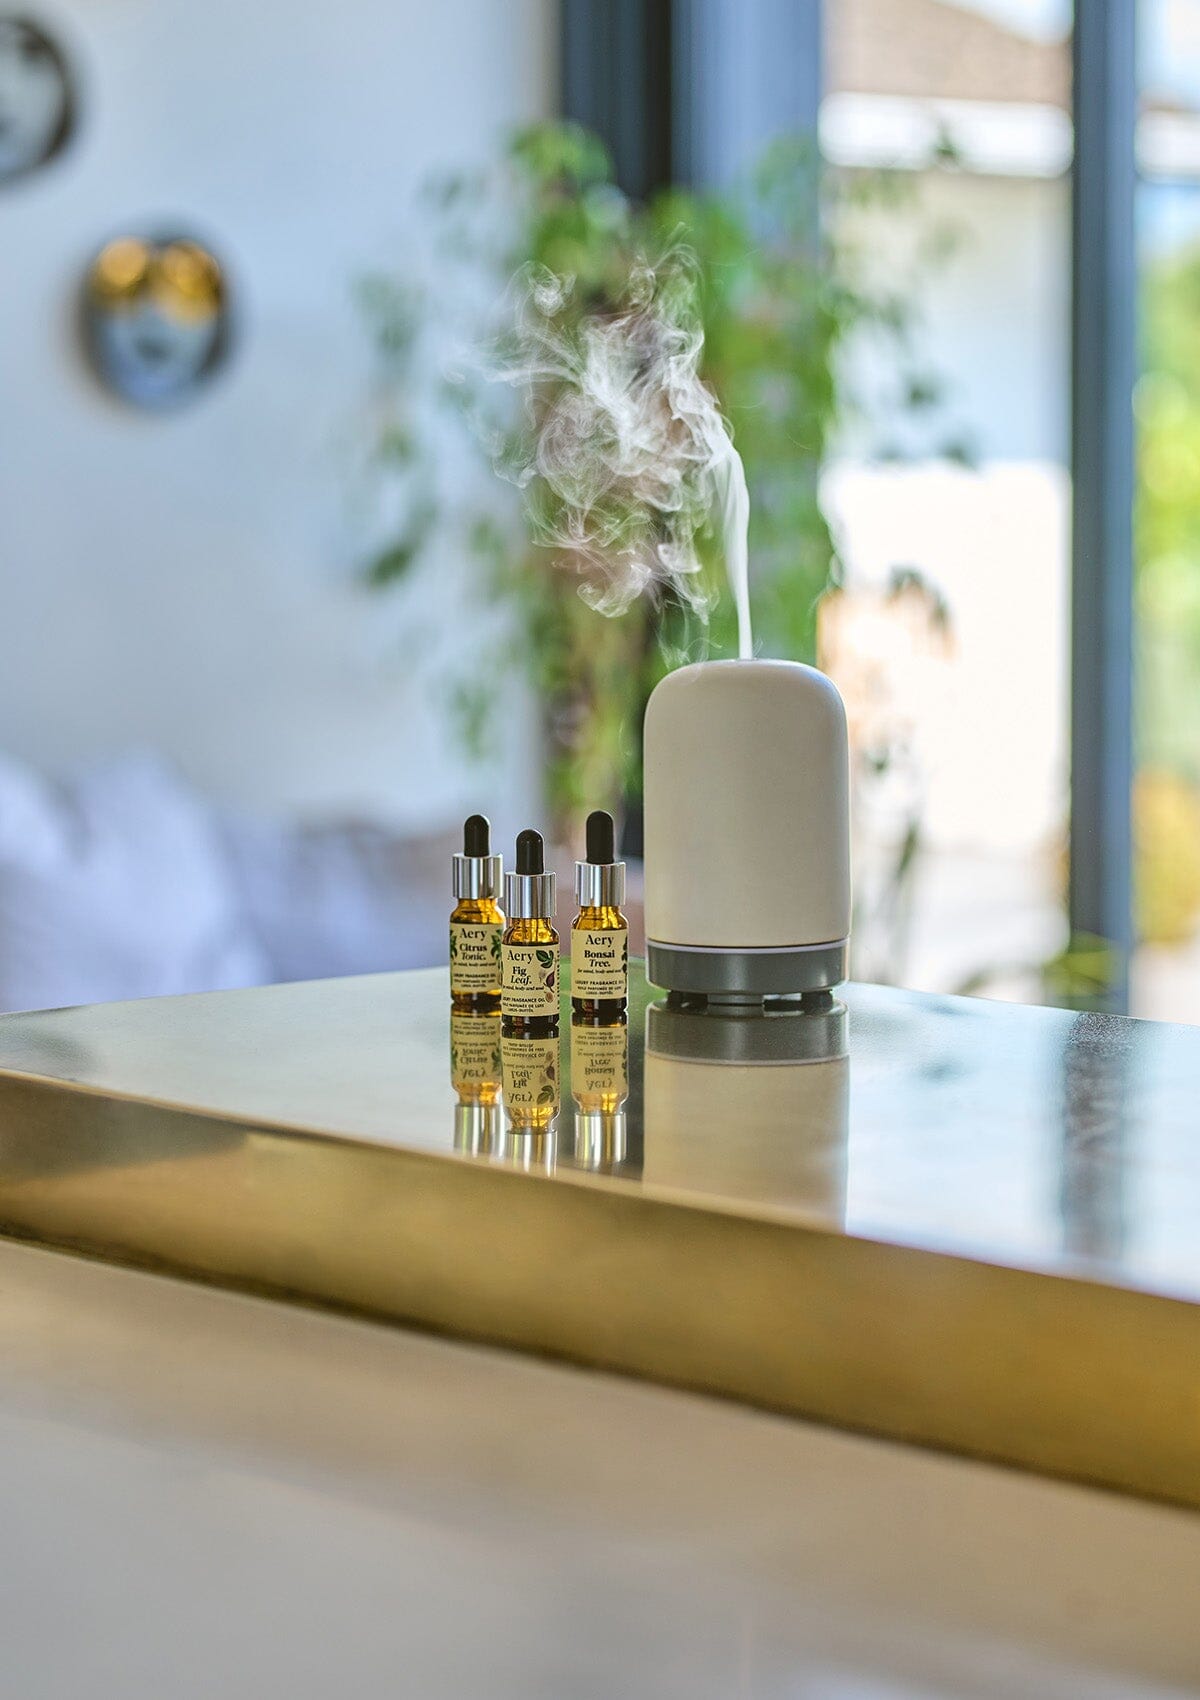 Cream Bonsai Tree, Fig Leaf and Citrus Tonic fragrance oils displayed next to electric diffuser on gold kitchen worktop